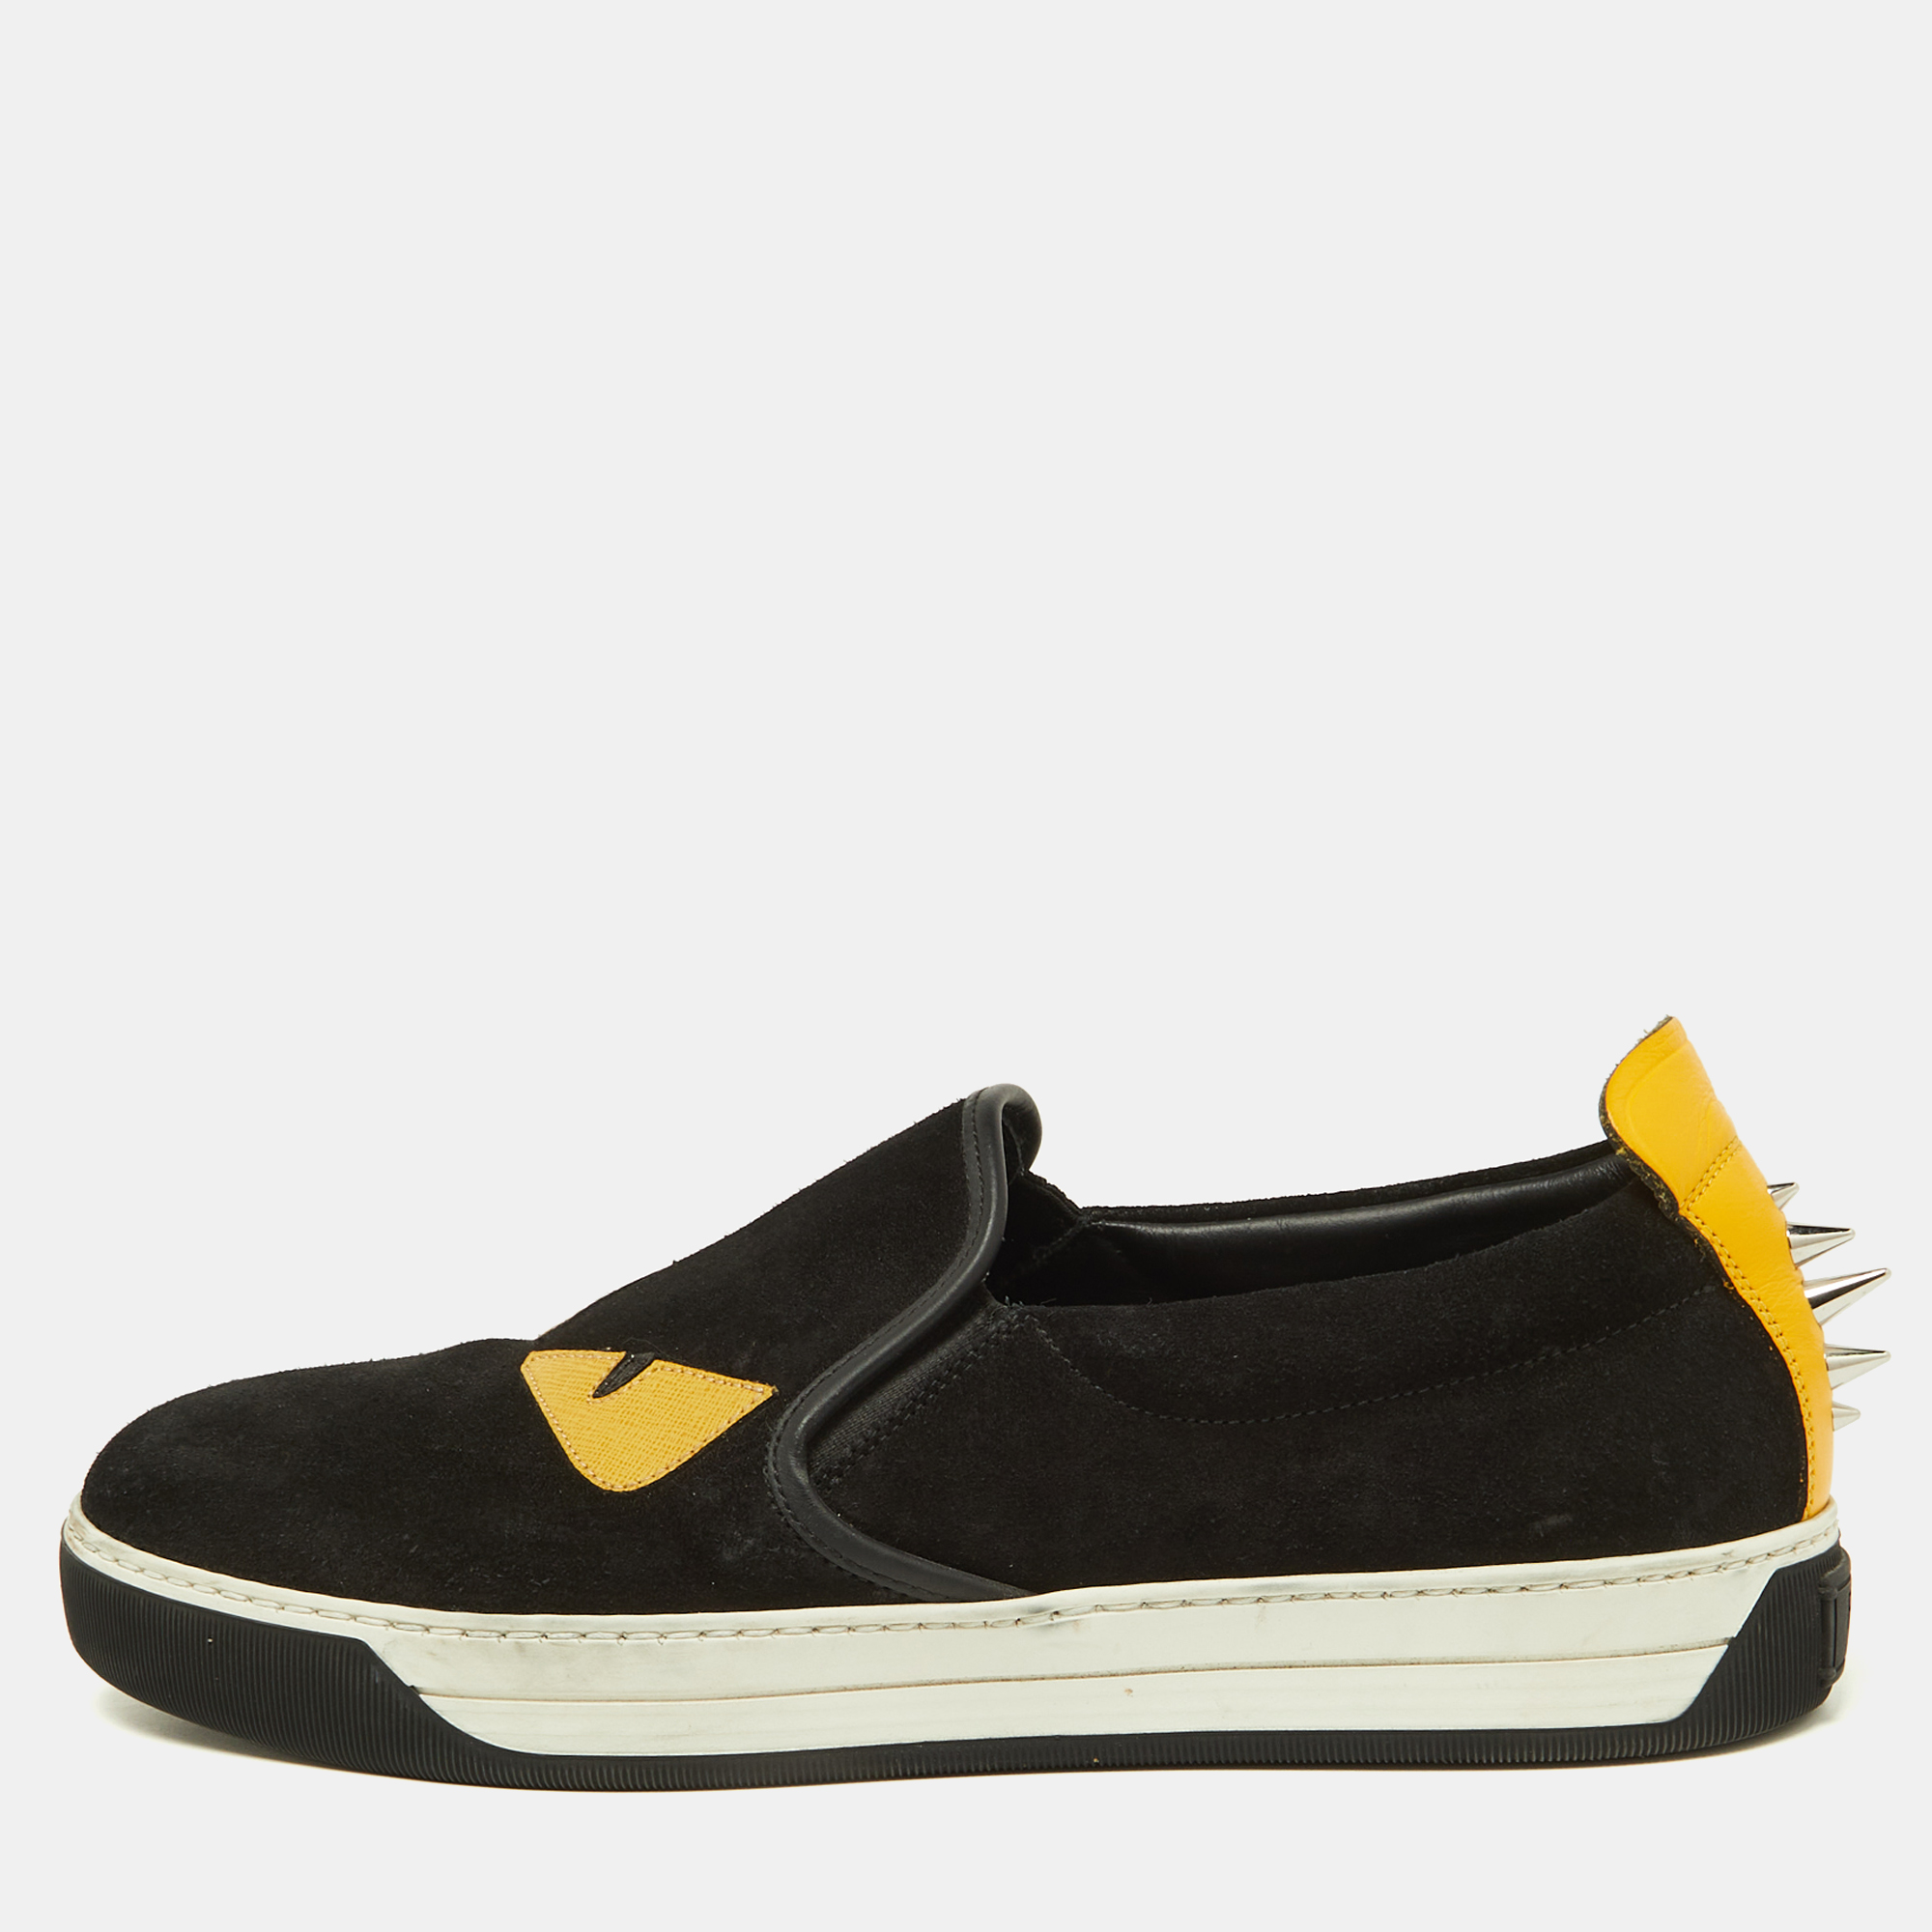 

Fendi Black/Yellow Suede and Leather Monster Eye Slip On Sneakers Size 41